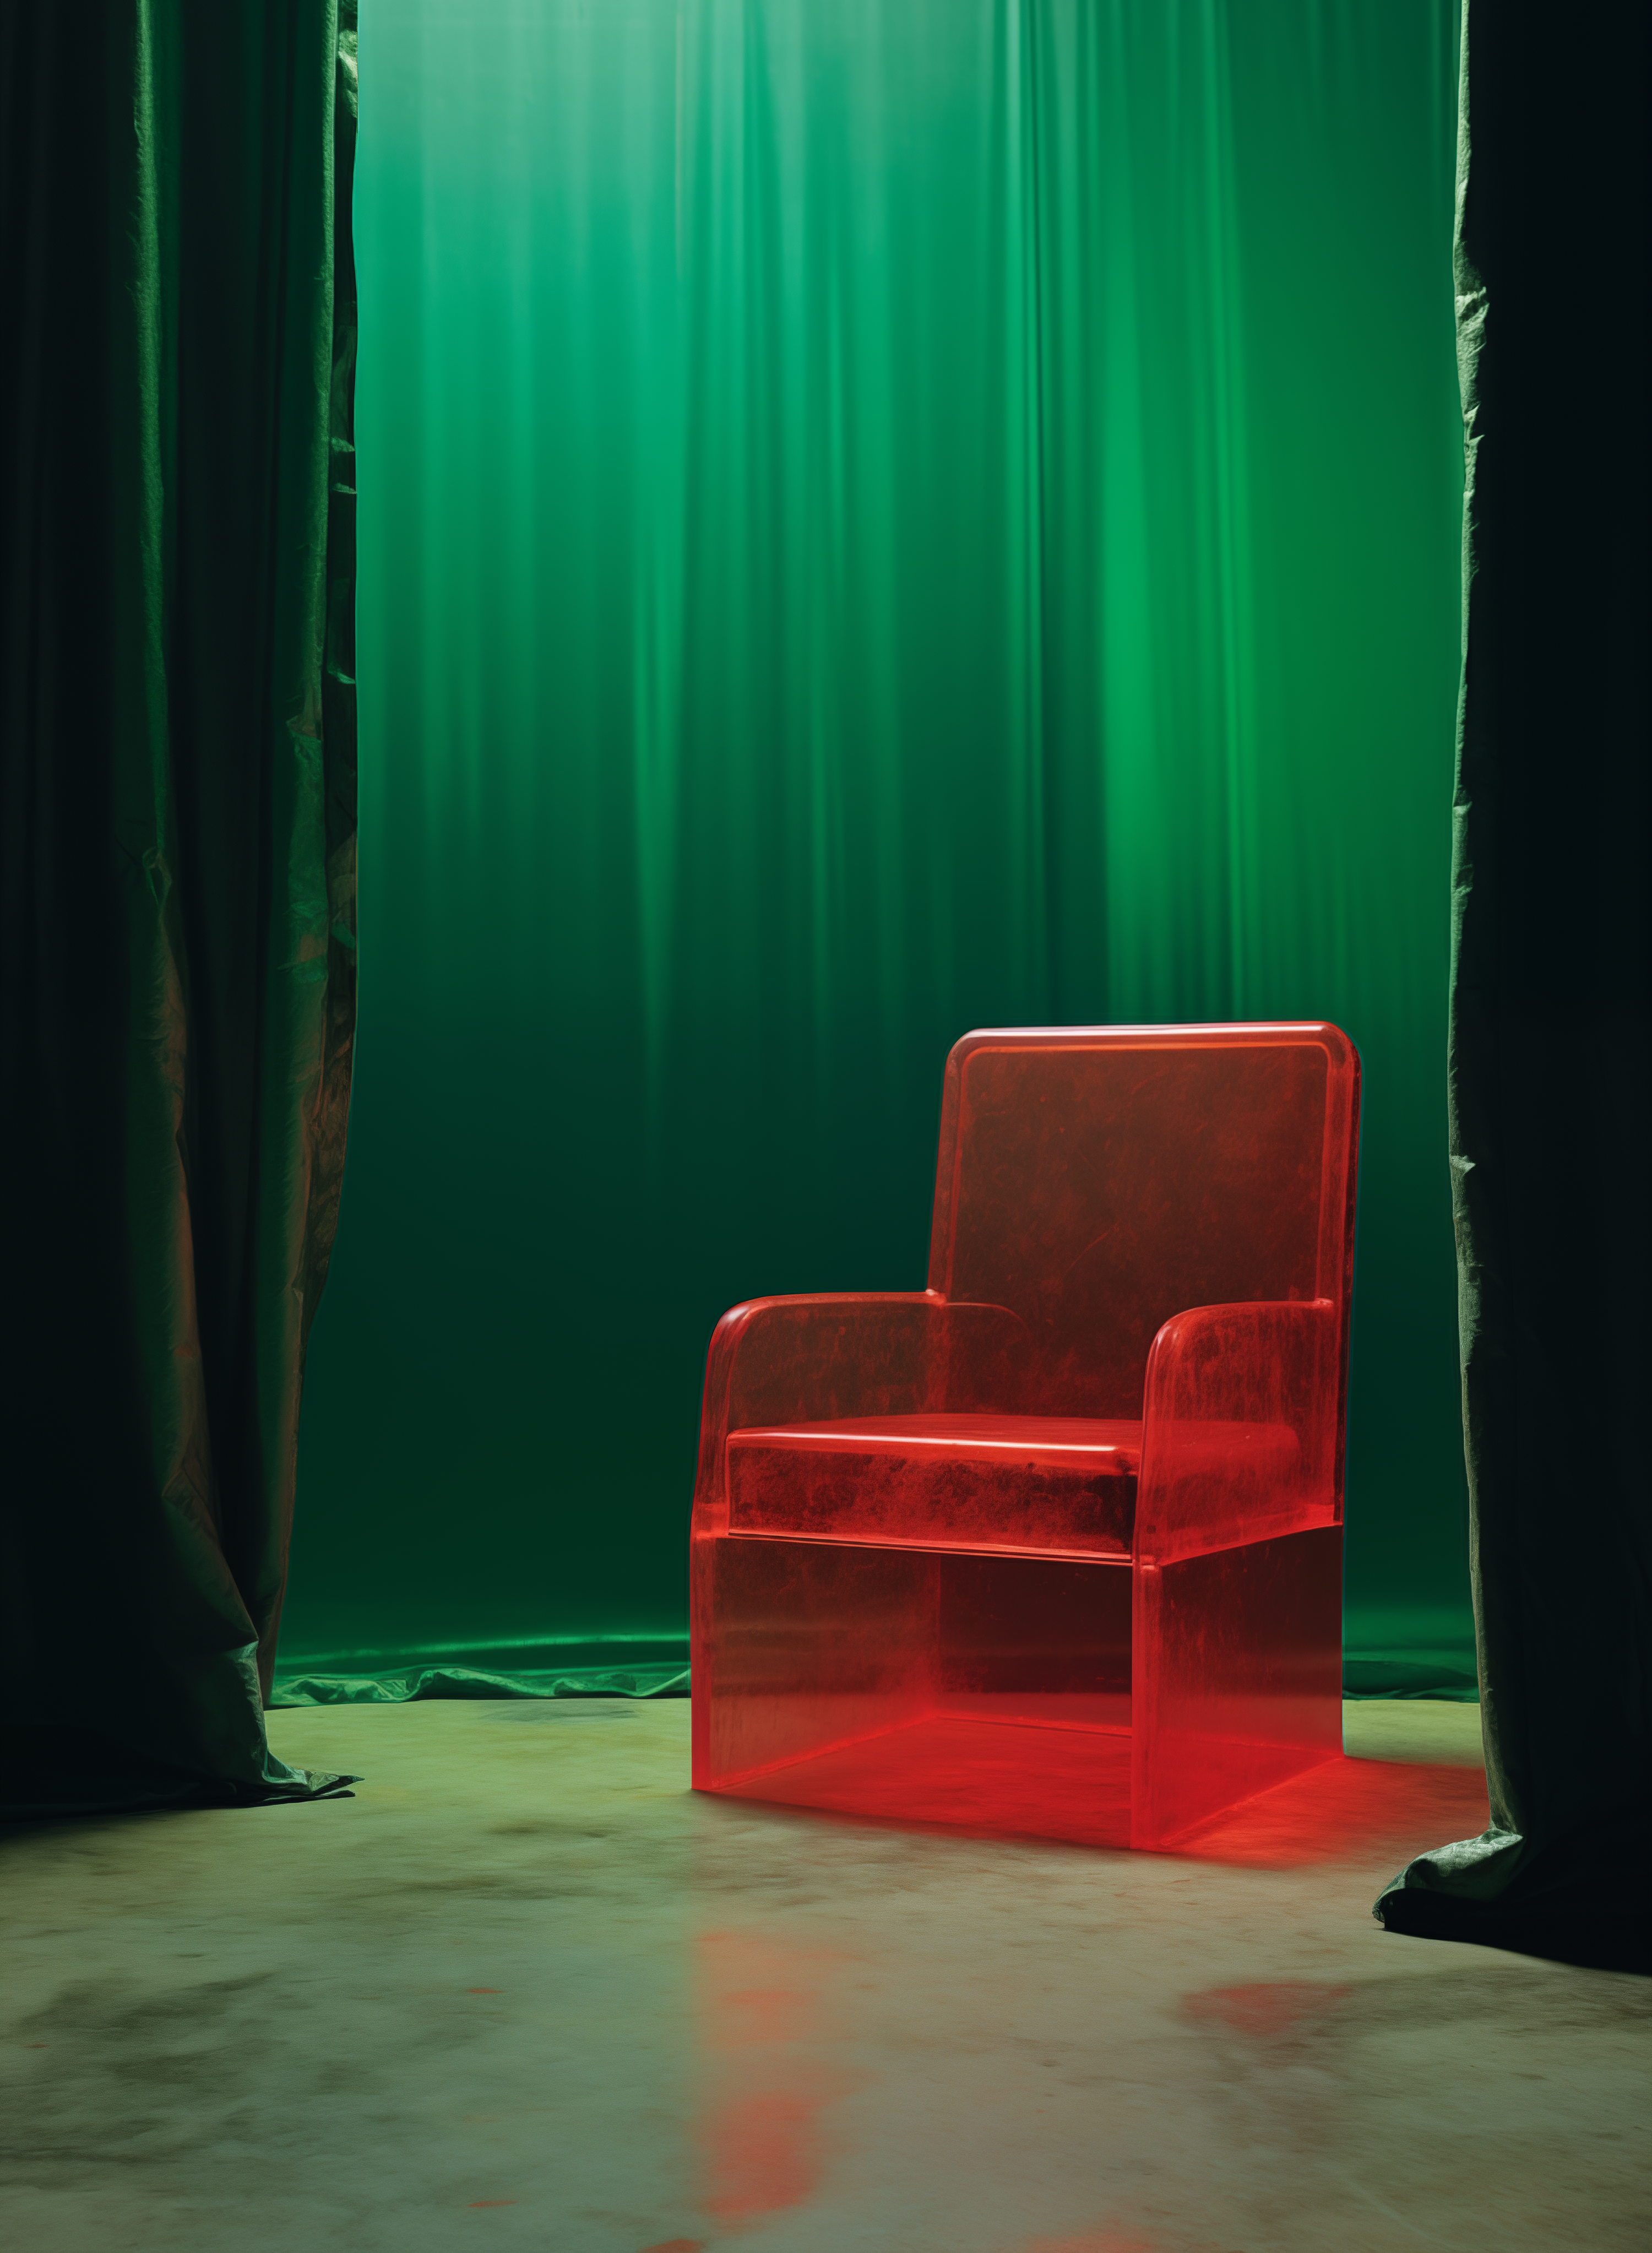 dovia_______a_green_chair_in_front_of_a_red_curtain_in_the_styl_ecb52182-67af-4765-97f7-4f1501df534c